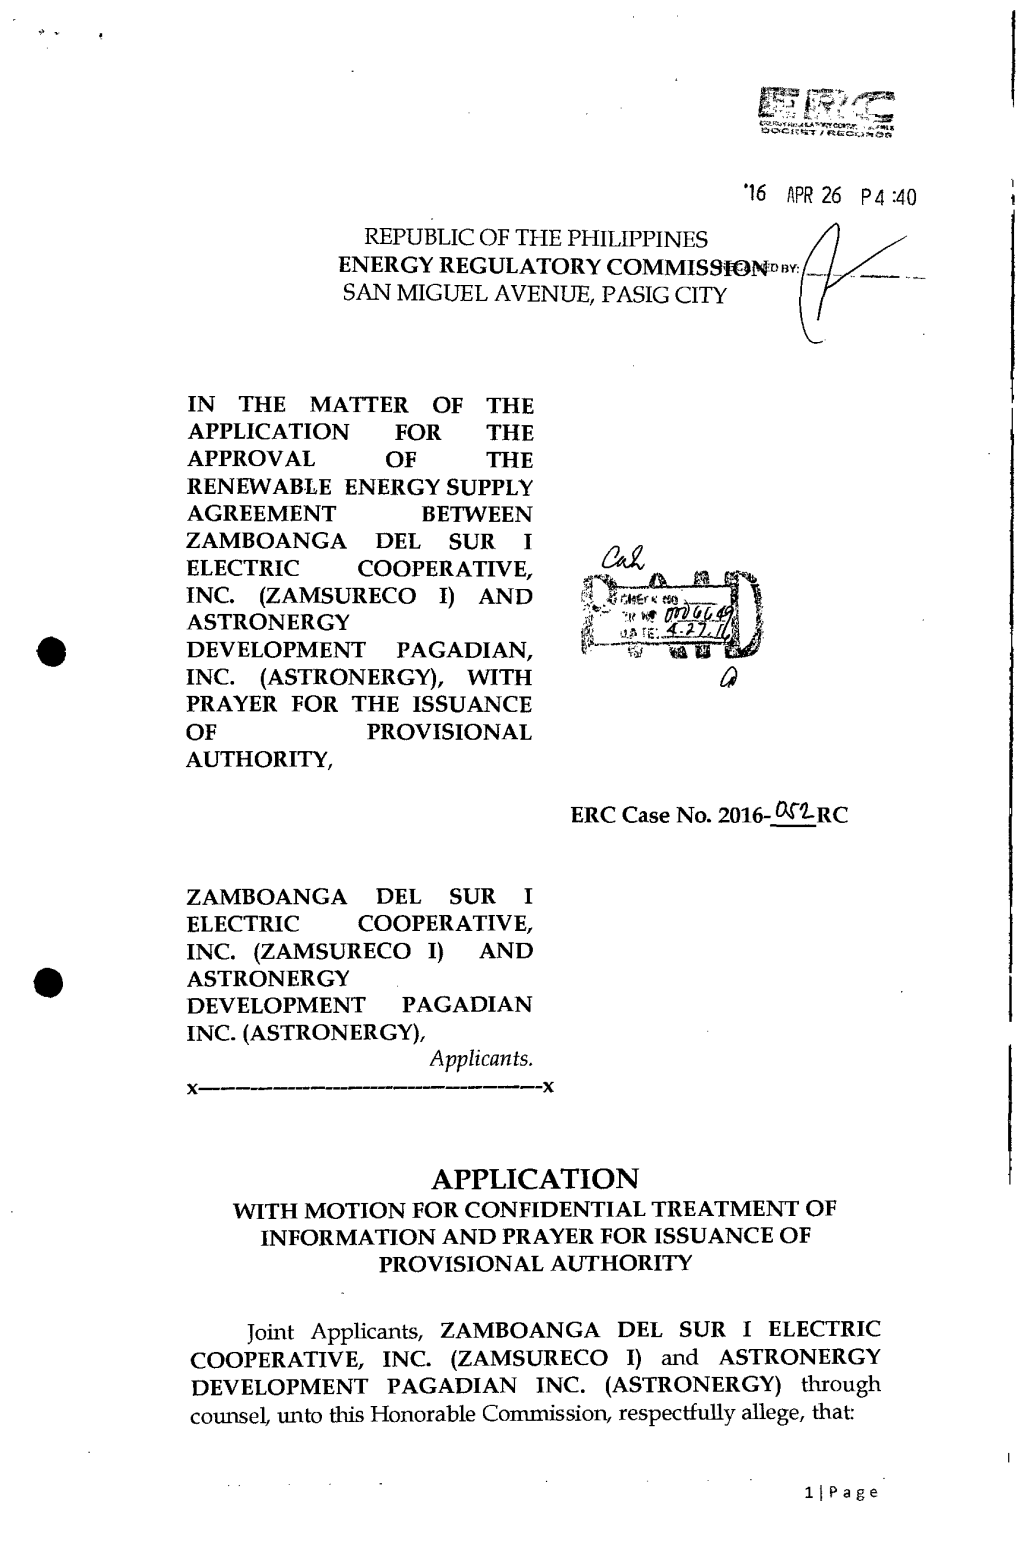 Application for the Approval of the Renewable Energy Supply Agreement Between Zamboanga Del Sur I Electric Cooperative, Inc